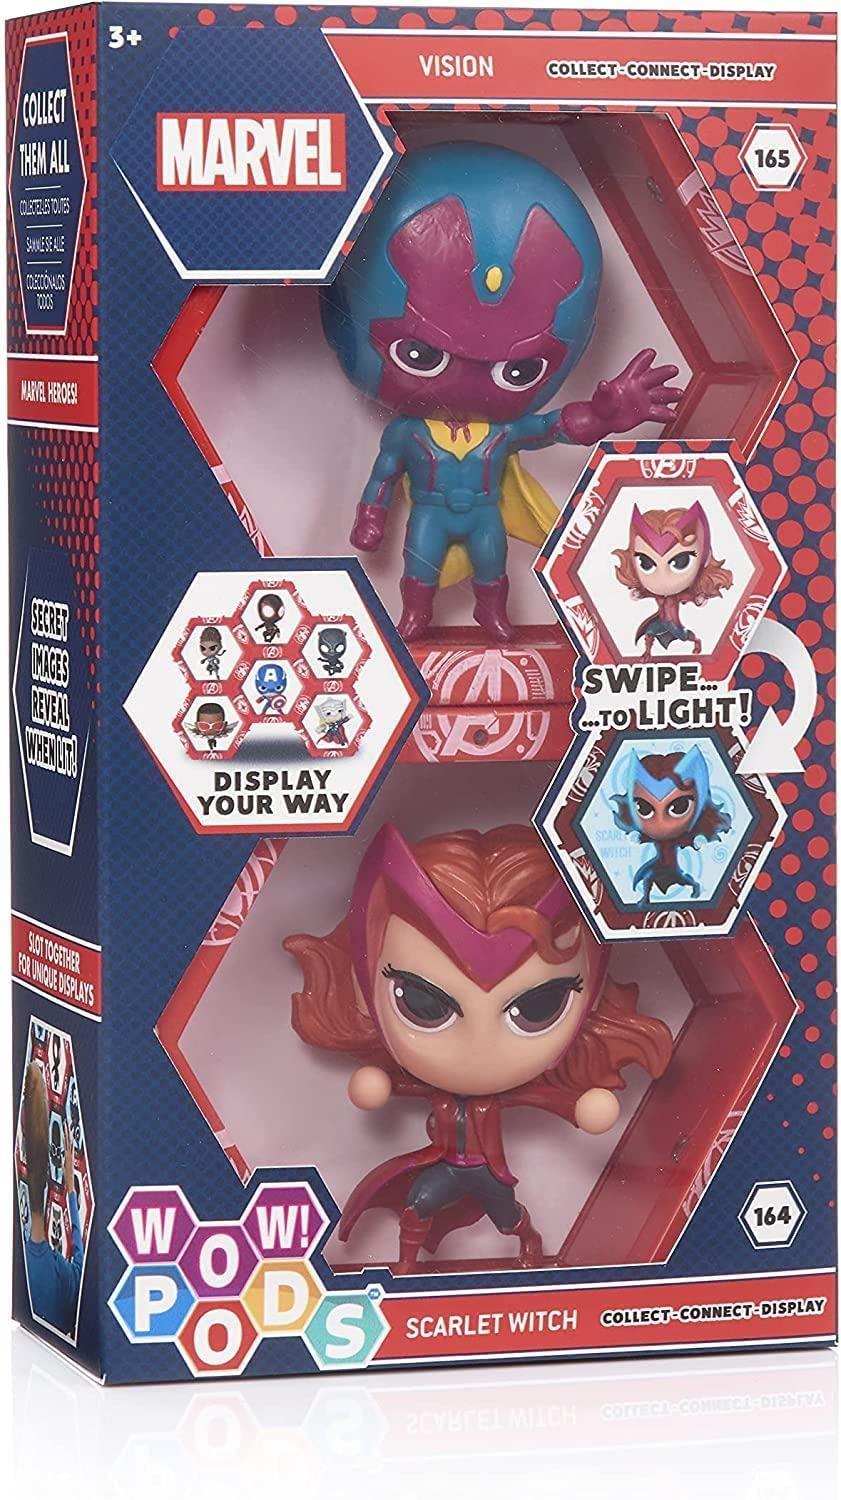 WOW! PODS Avengers Collection - Vision and Scarlet Witch | Superhero Light-Up Bobble-Head Figures | Official Marvel Collectable Toys & Gifts, Avengers Collection - Twin Pack